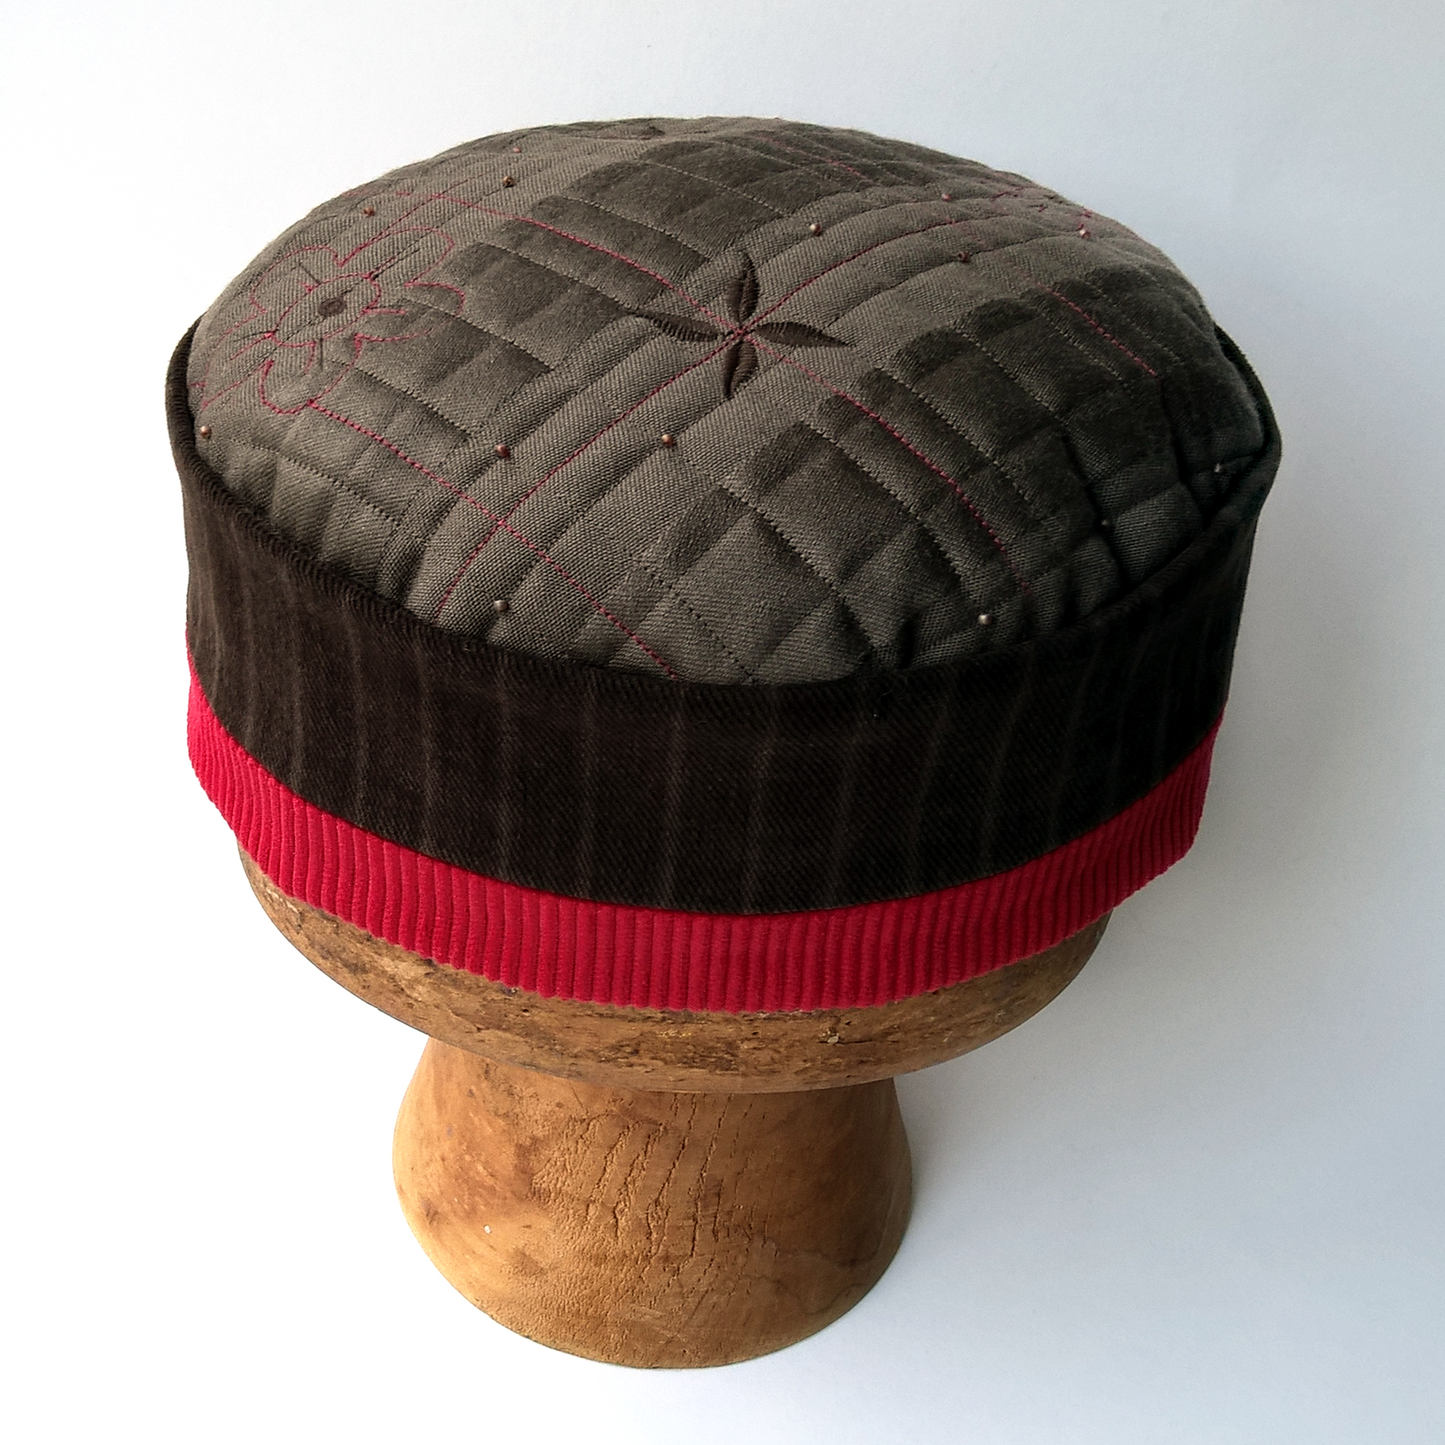 Brown and red ethnic style smoking cap